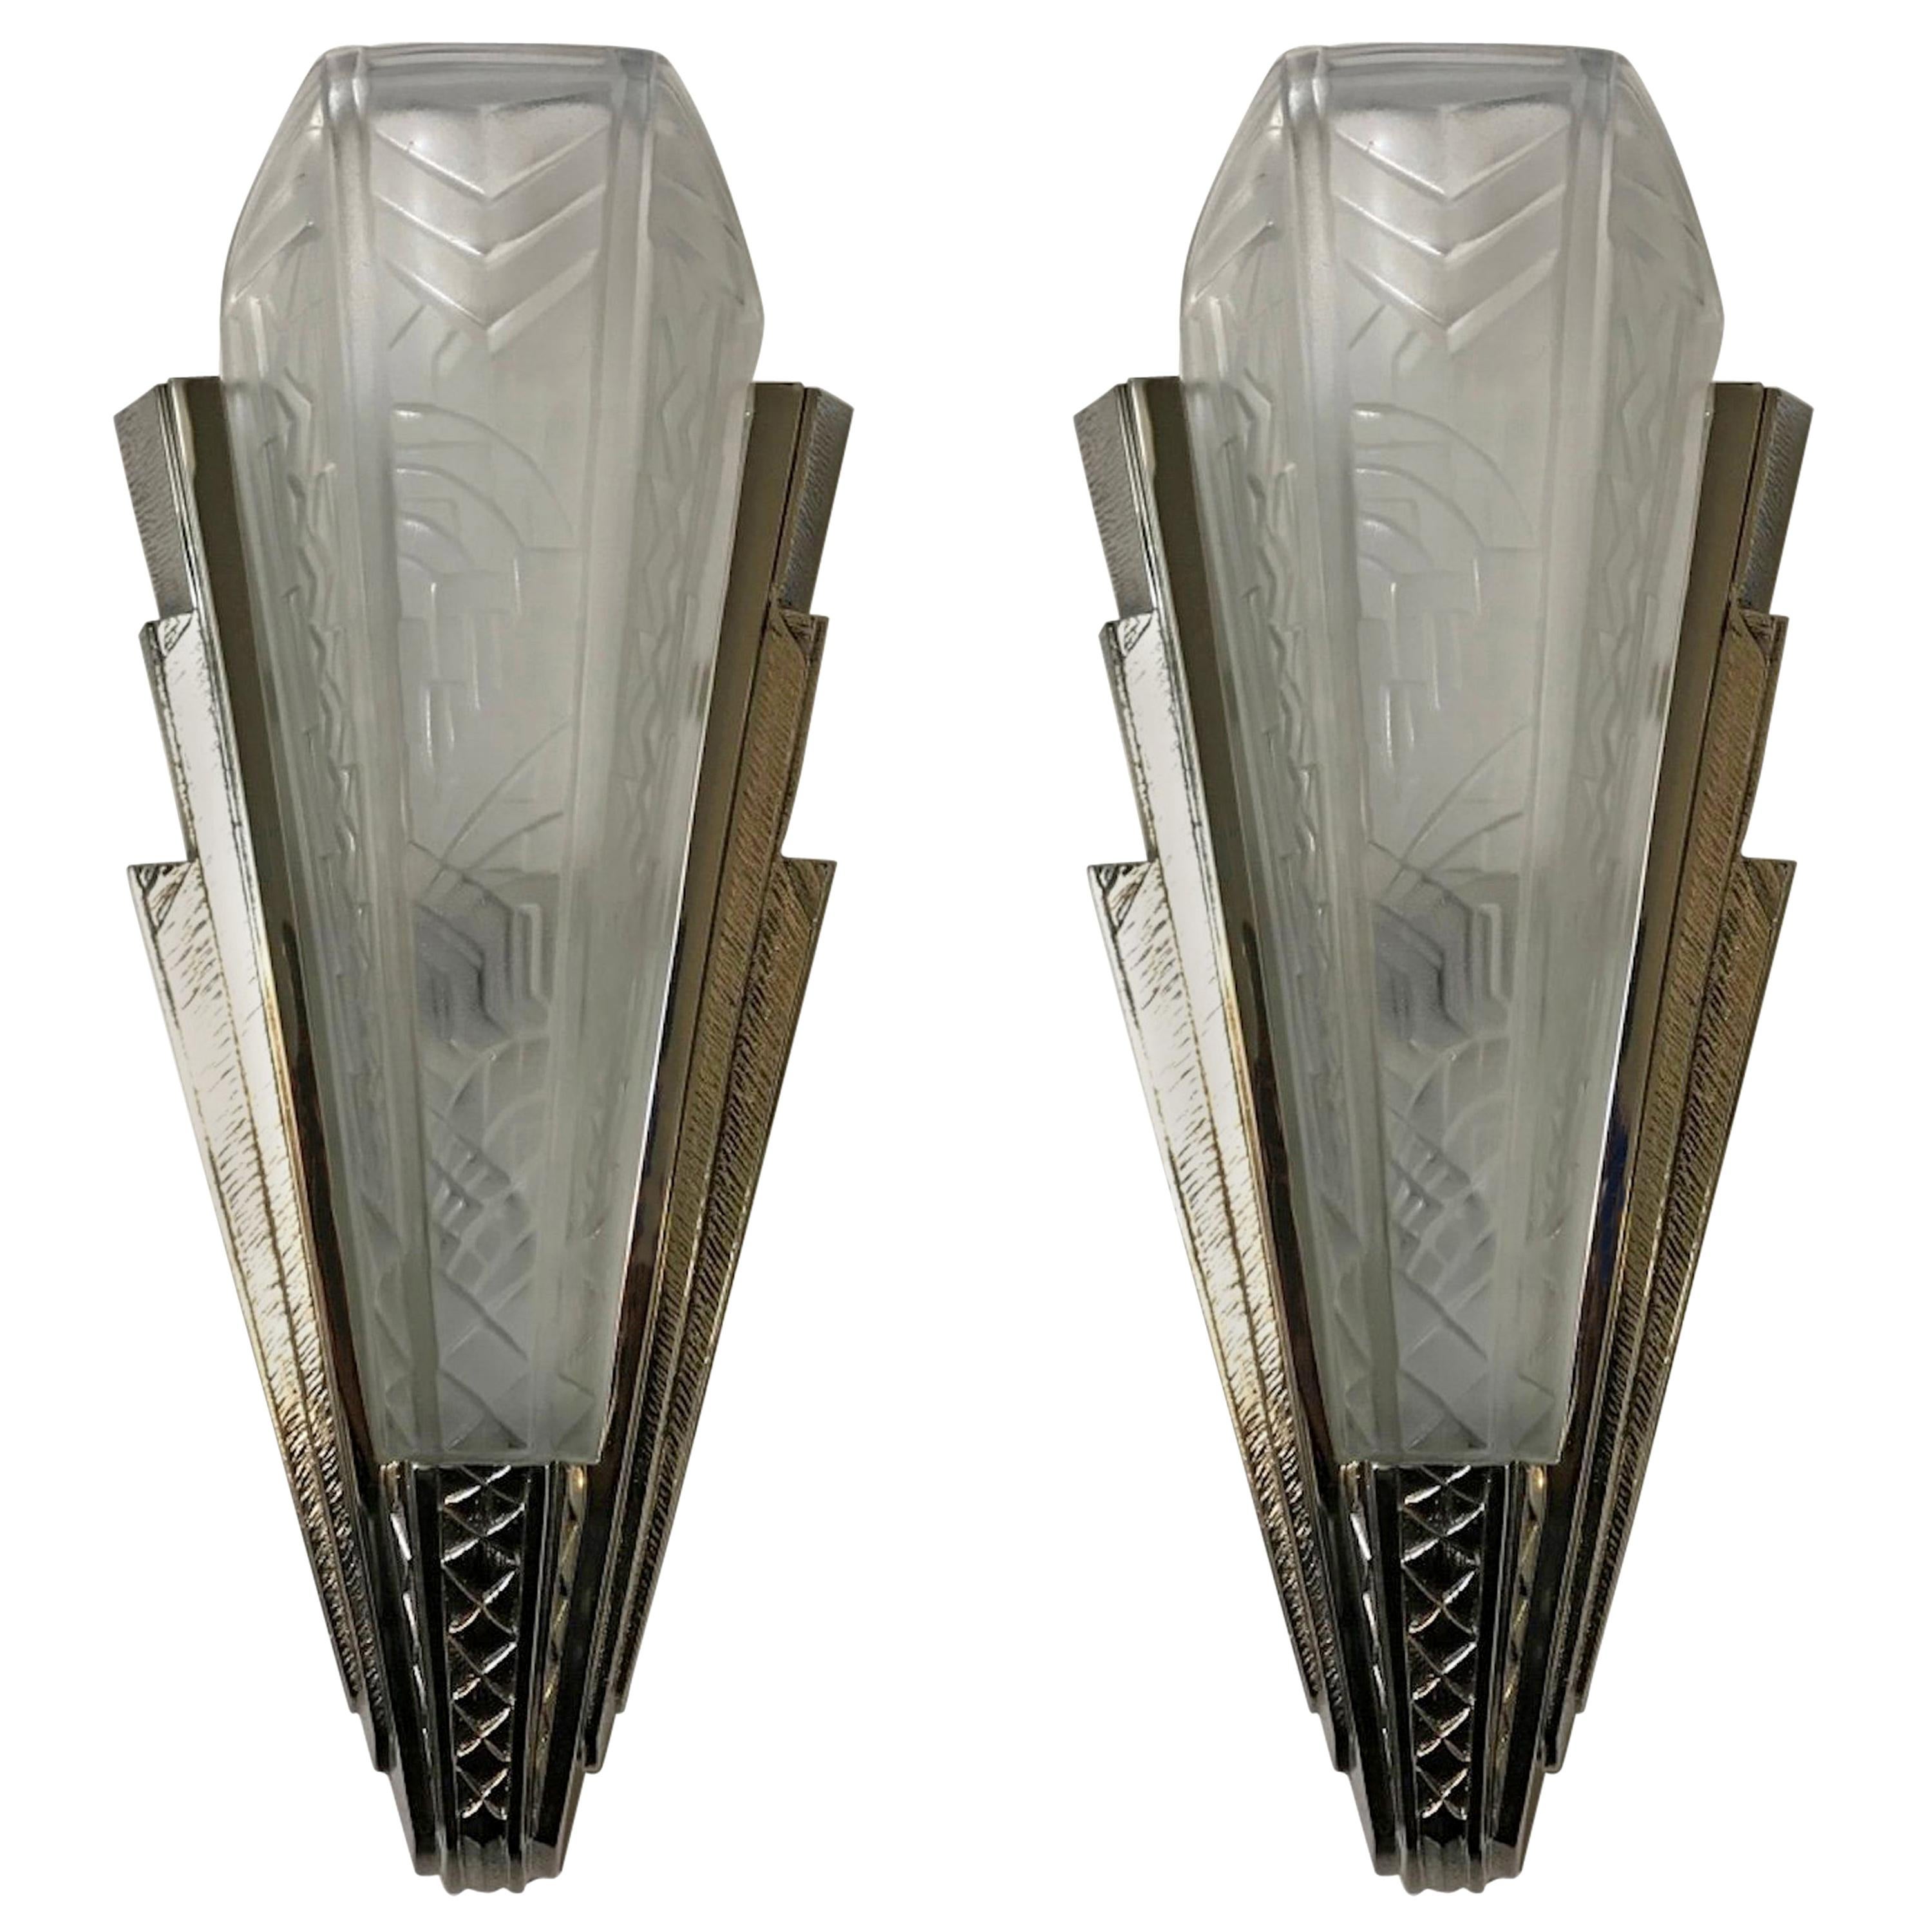 Pair of French Art Deco Wall Sconces Signed by P. Maynadier